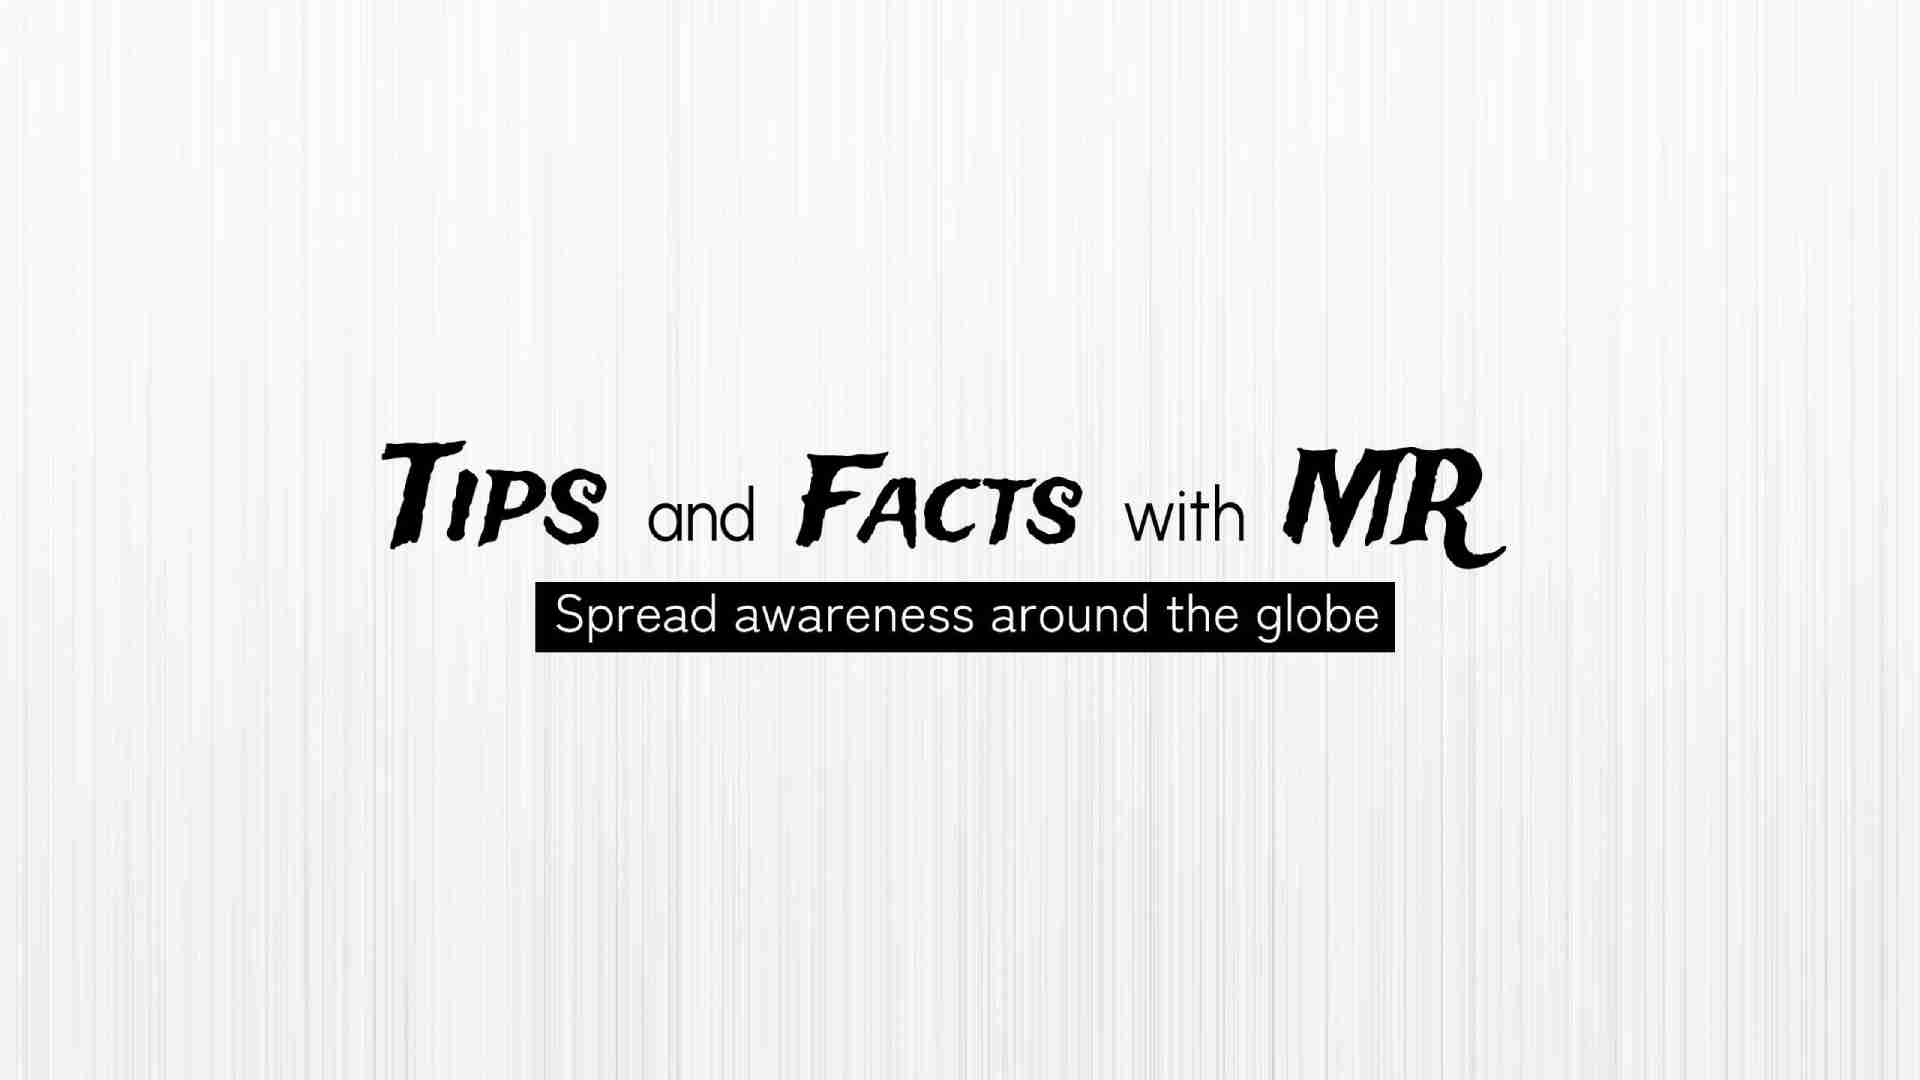 Tips and Facts with MR